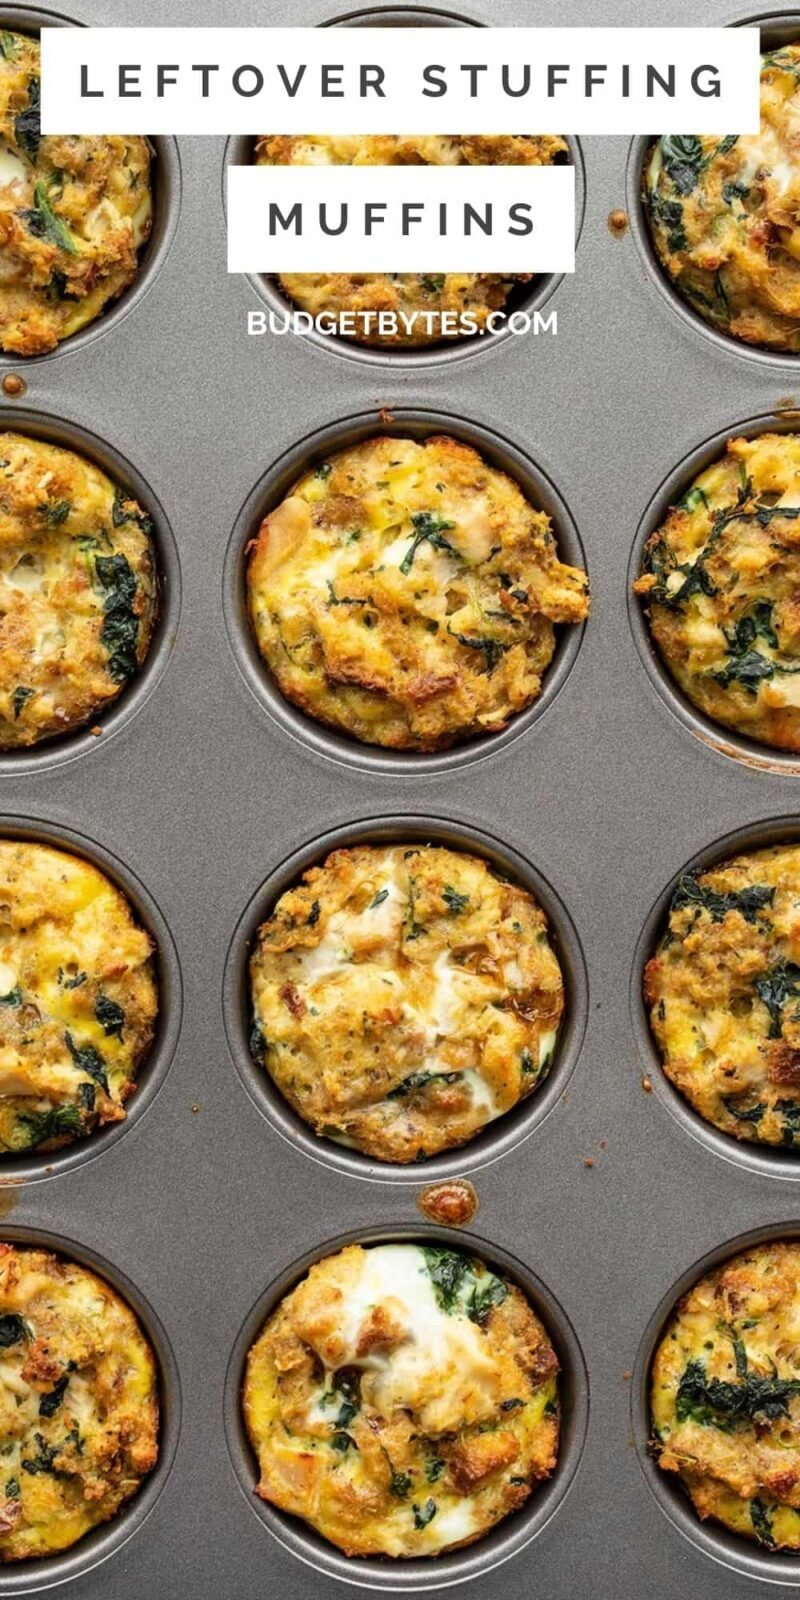 stuffing muffins in a muffin tin, title text at the top